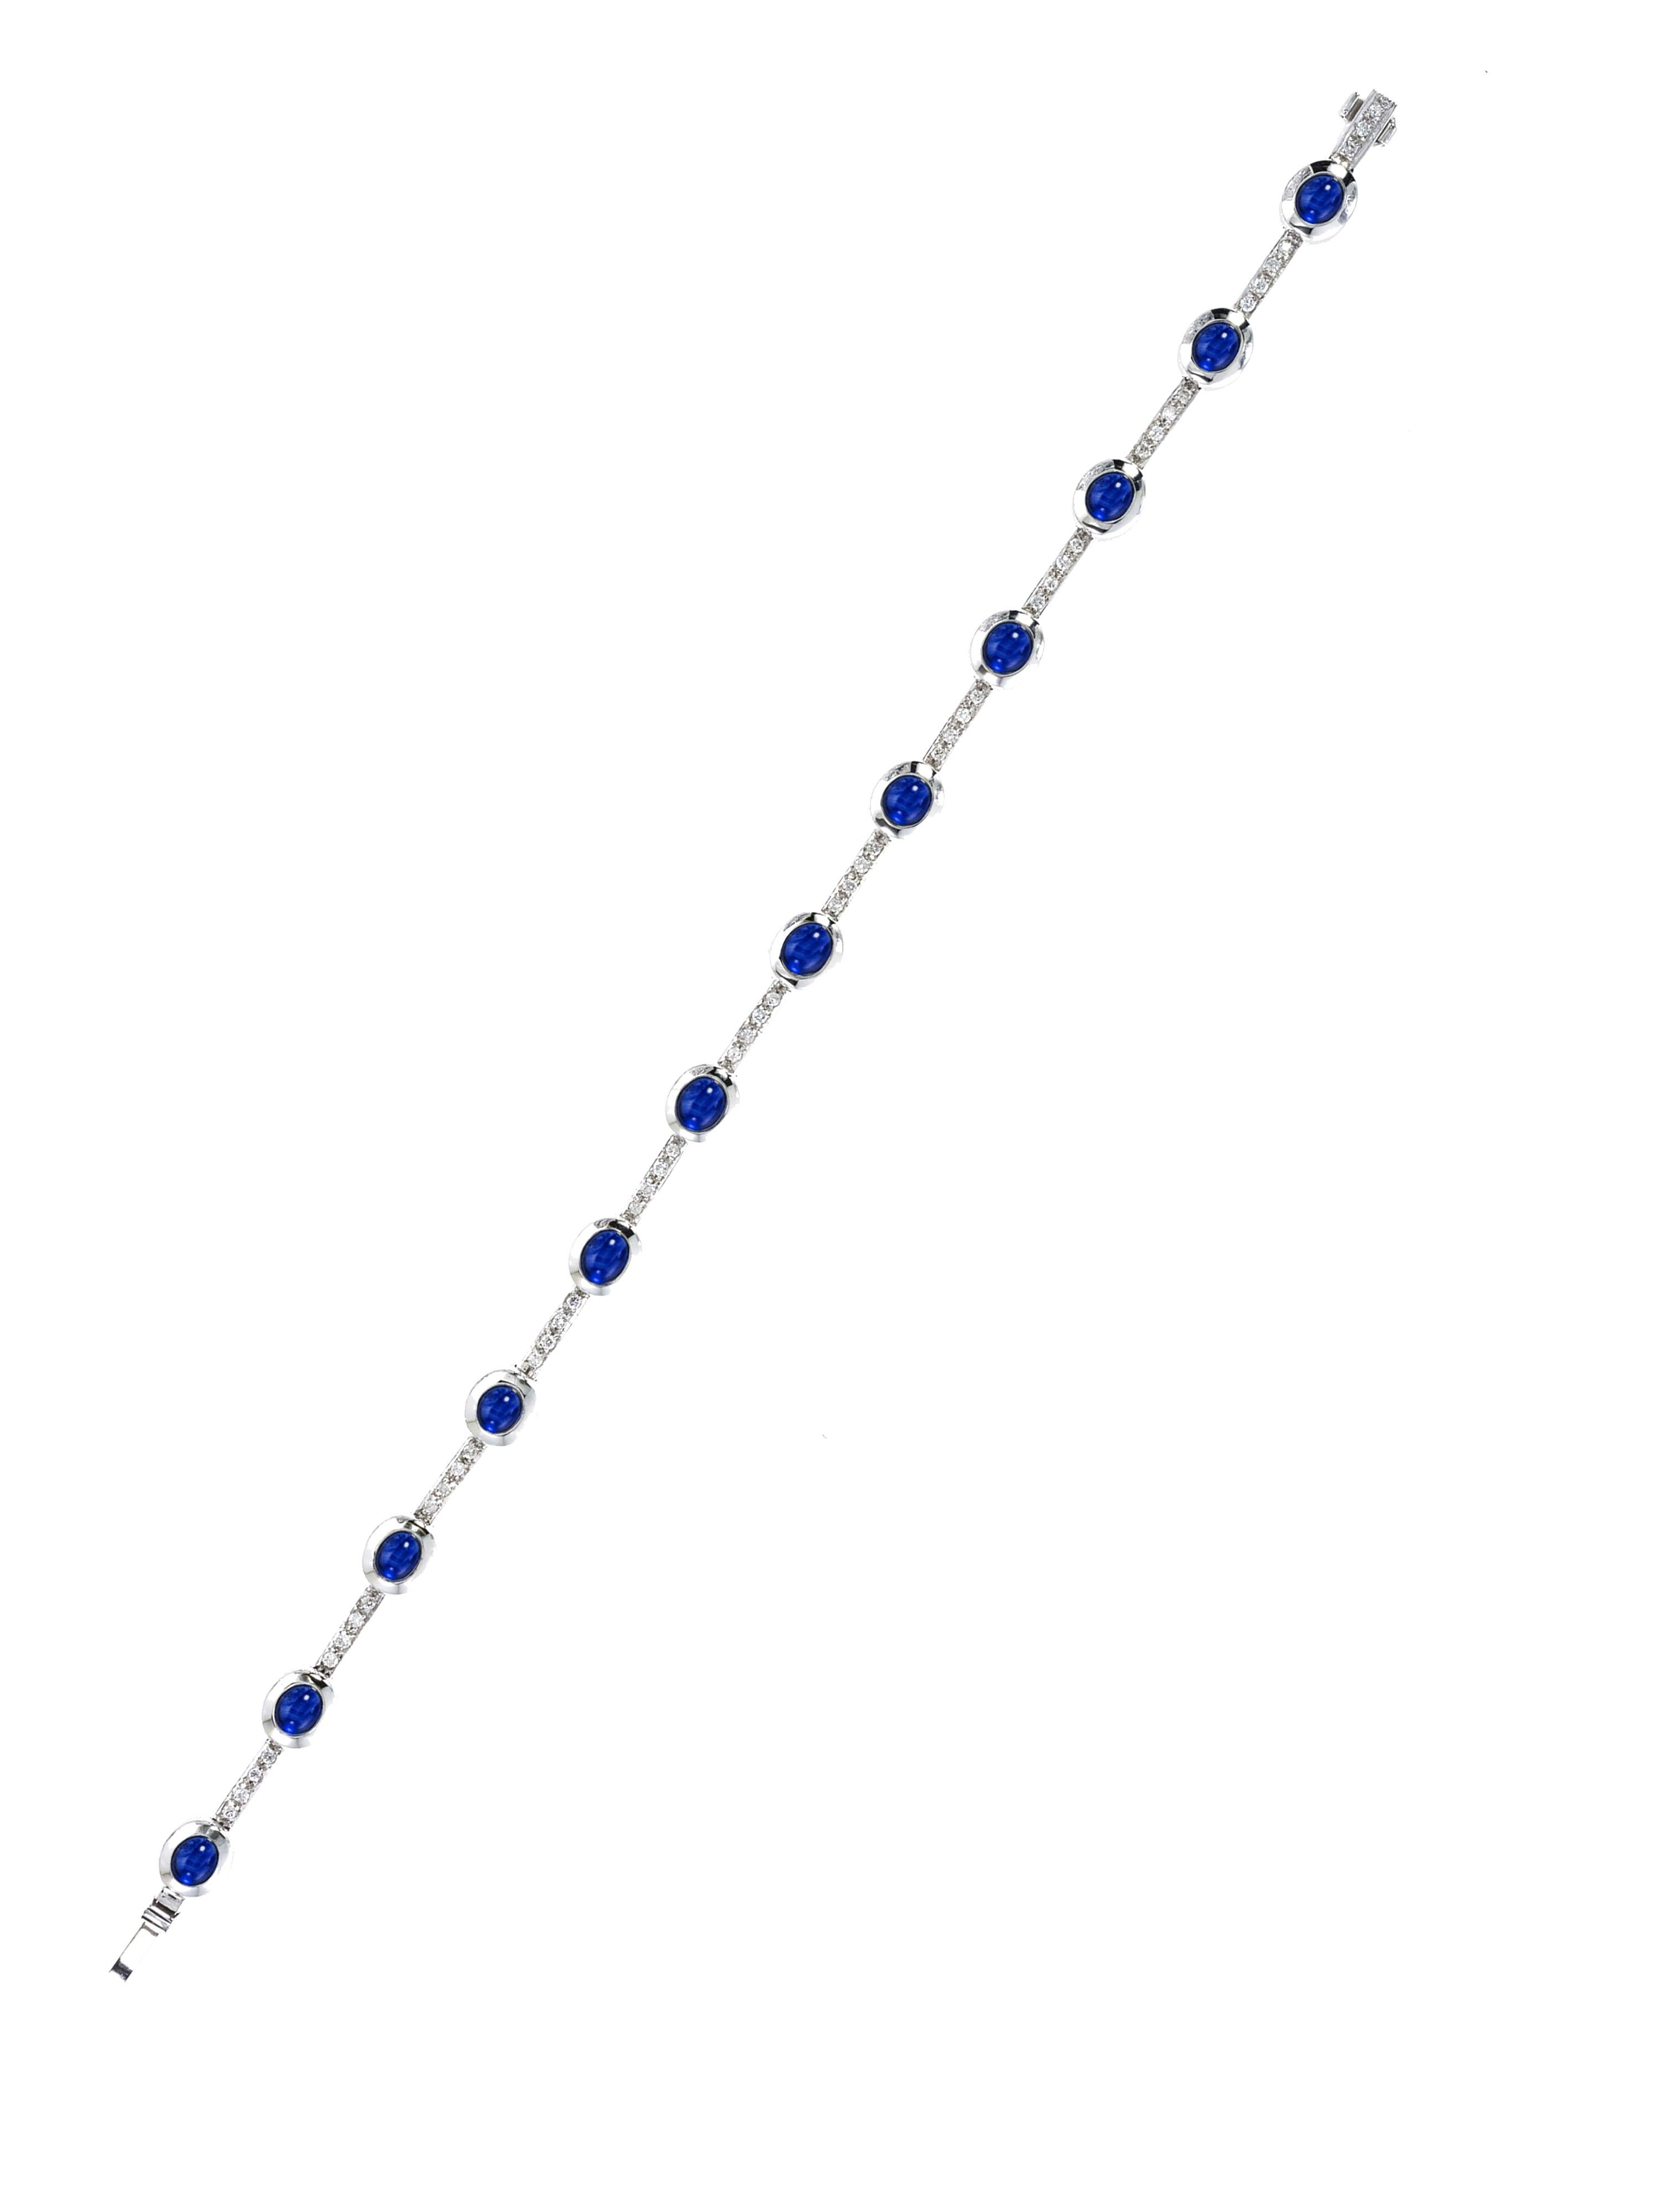 Tennis bracelet available in Rubies or blue Sapphire.
Elegant but extremely versatile, these bracelets may be worn everyday and for every occasion.

The sapphire one weighs gr.21.35 and the cabochon cut stones weigh ct 8.67. Diamonds weigh ct